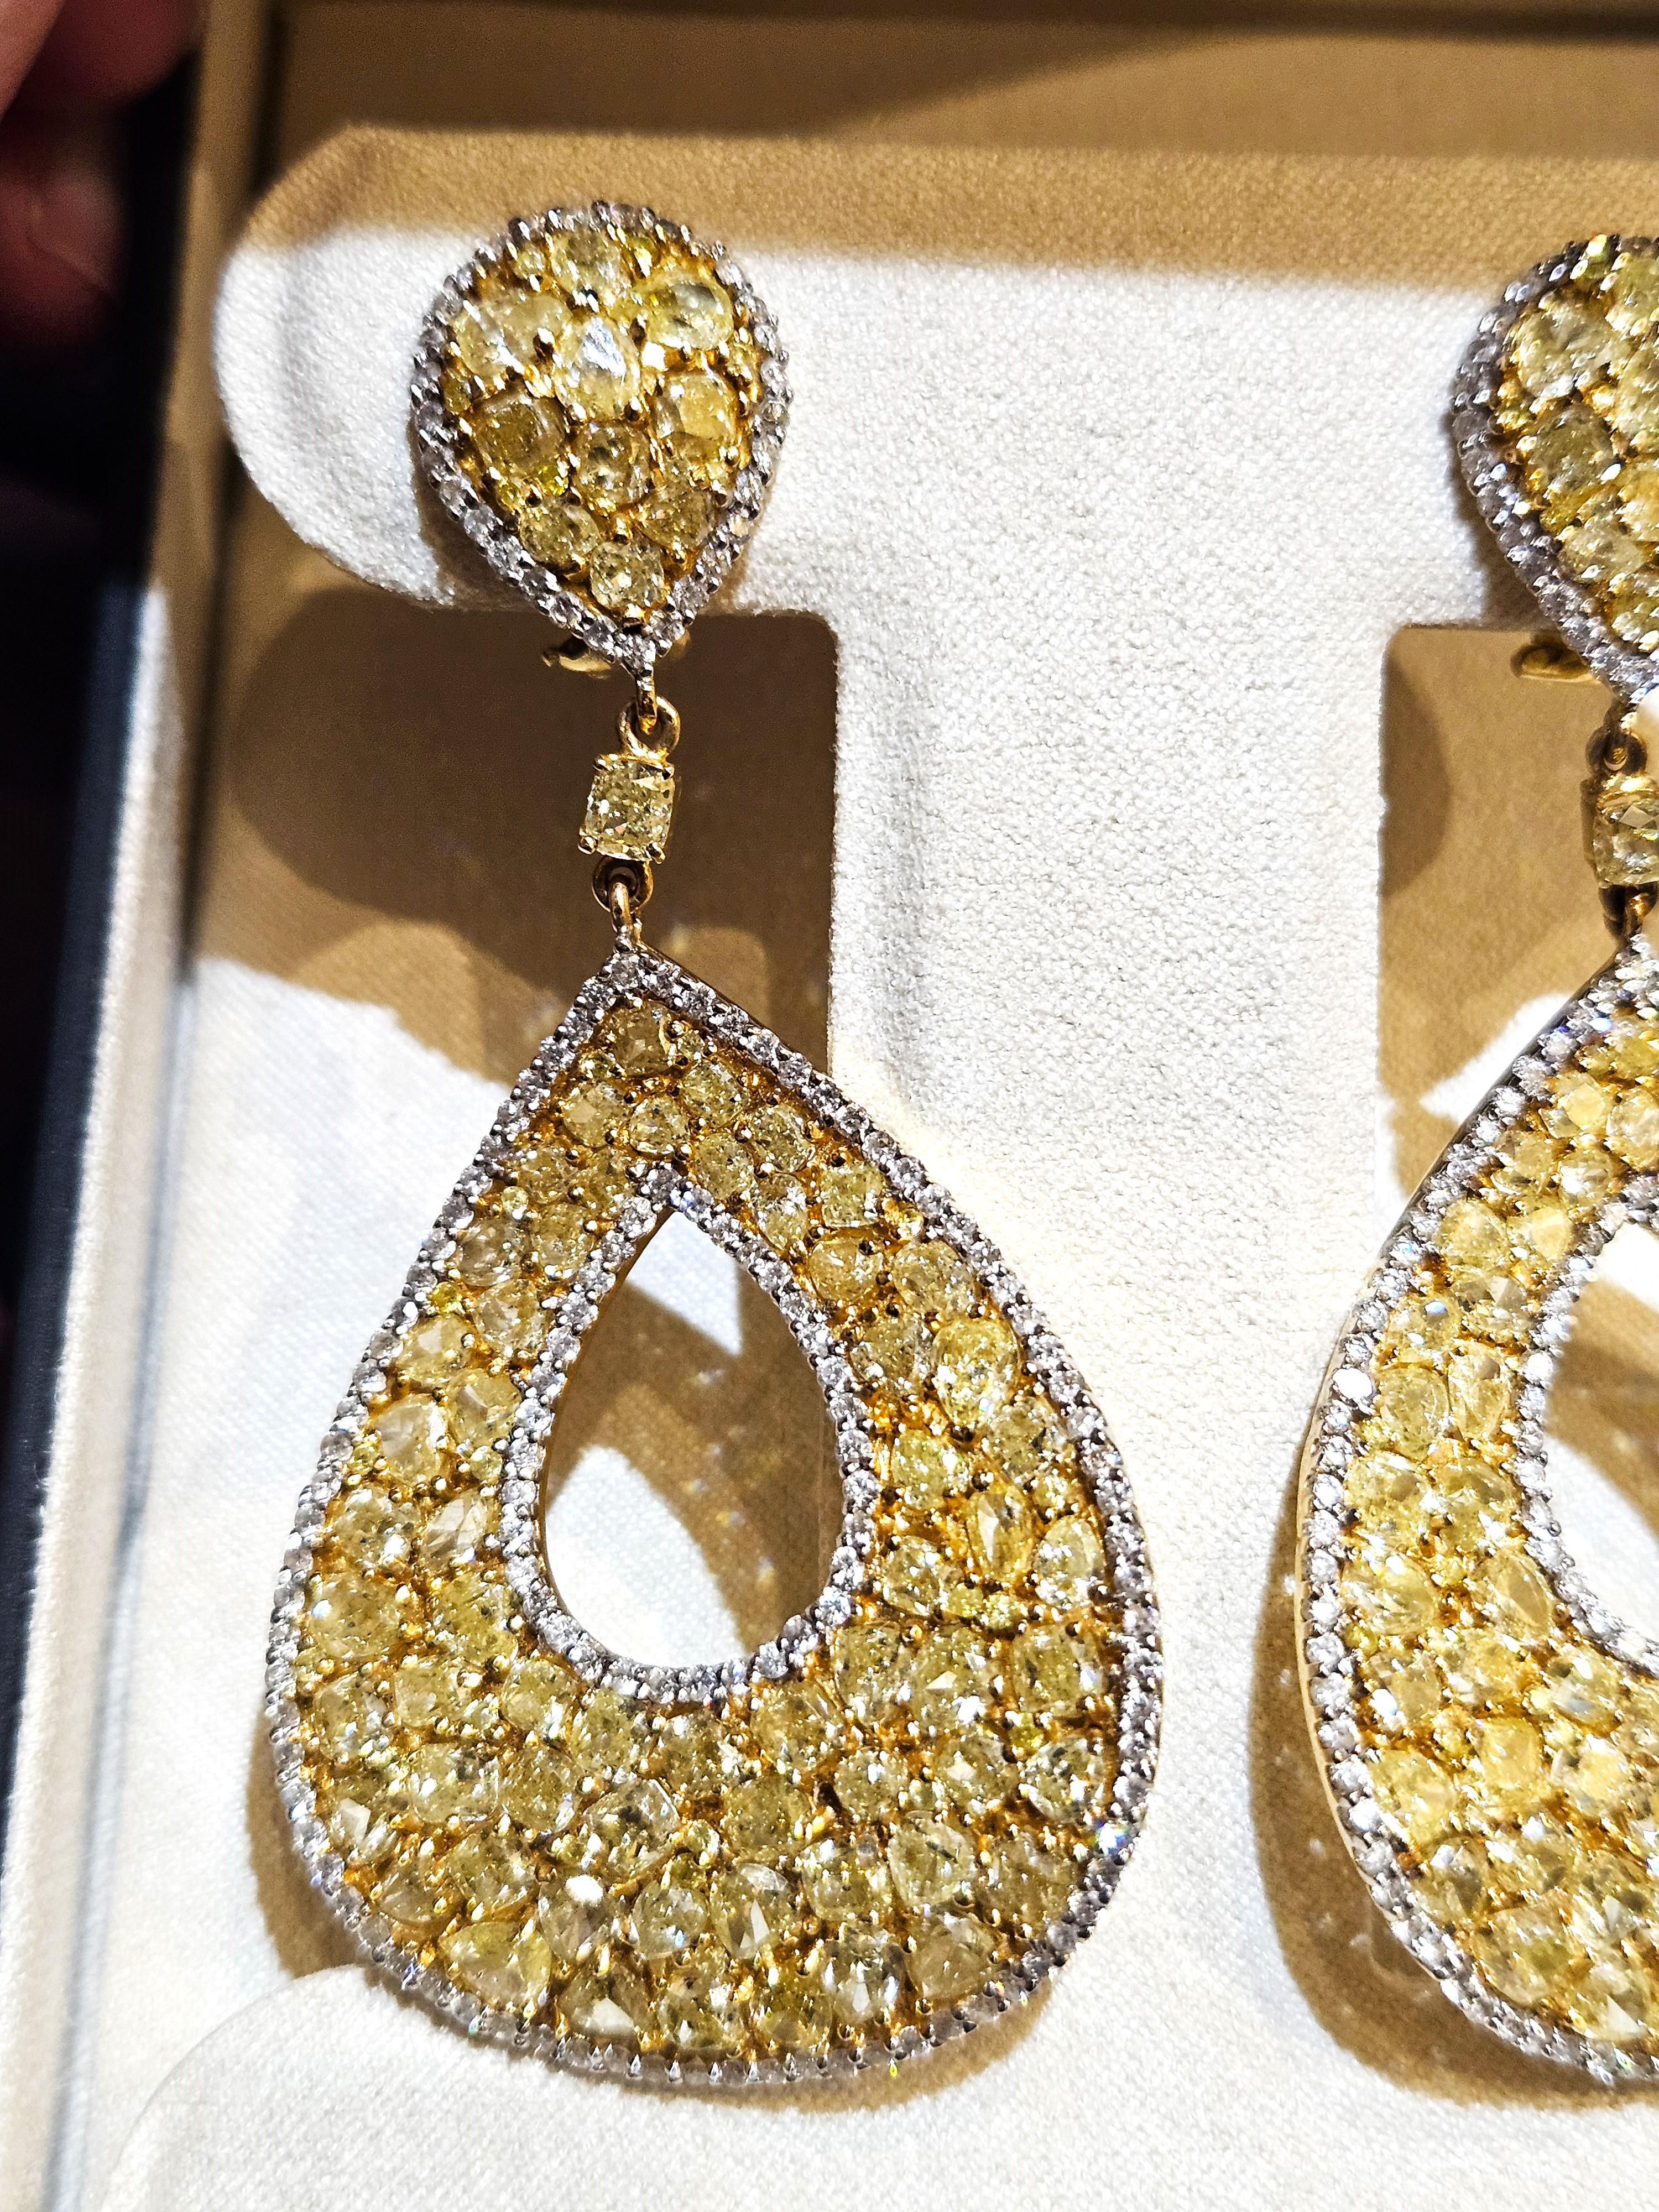 The Following Item we are offering are these Extremely Rare Beautiful 18KT Gold Fine Large Fancy Yellow and White Diamond Dangle Earrings. Each Earring features Rare Gorgeous Glittering Fancy Yellow Diamonds Draped with Sparkling White Diamonds in